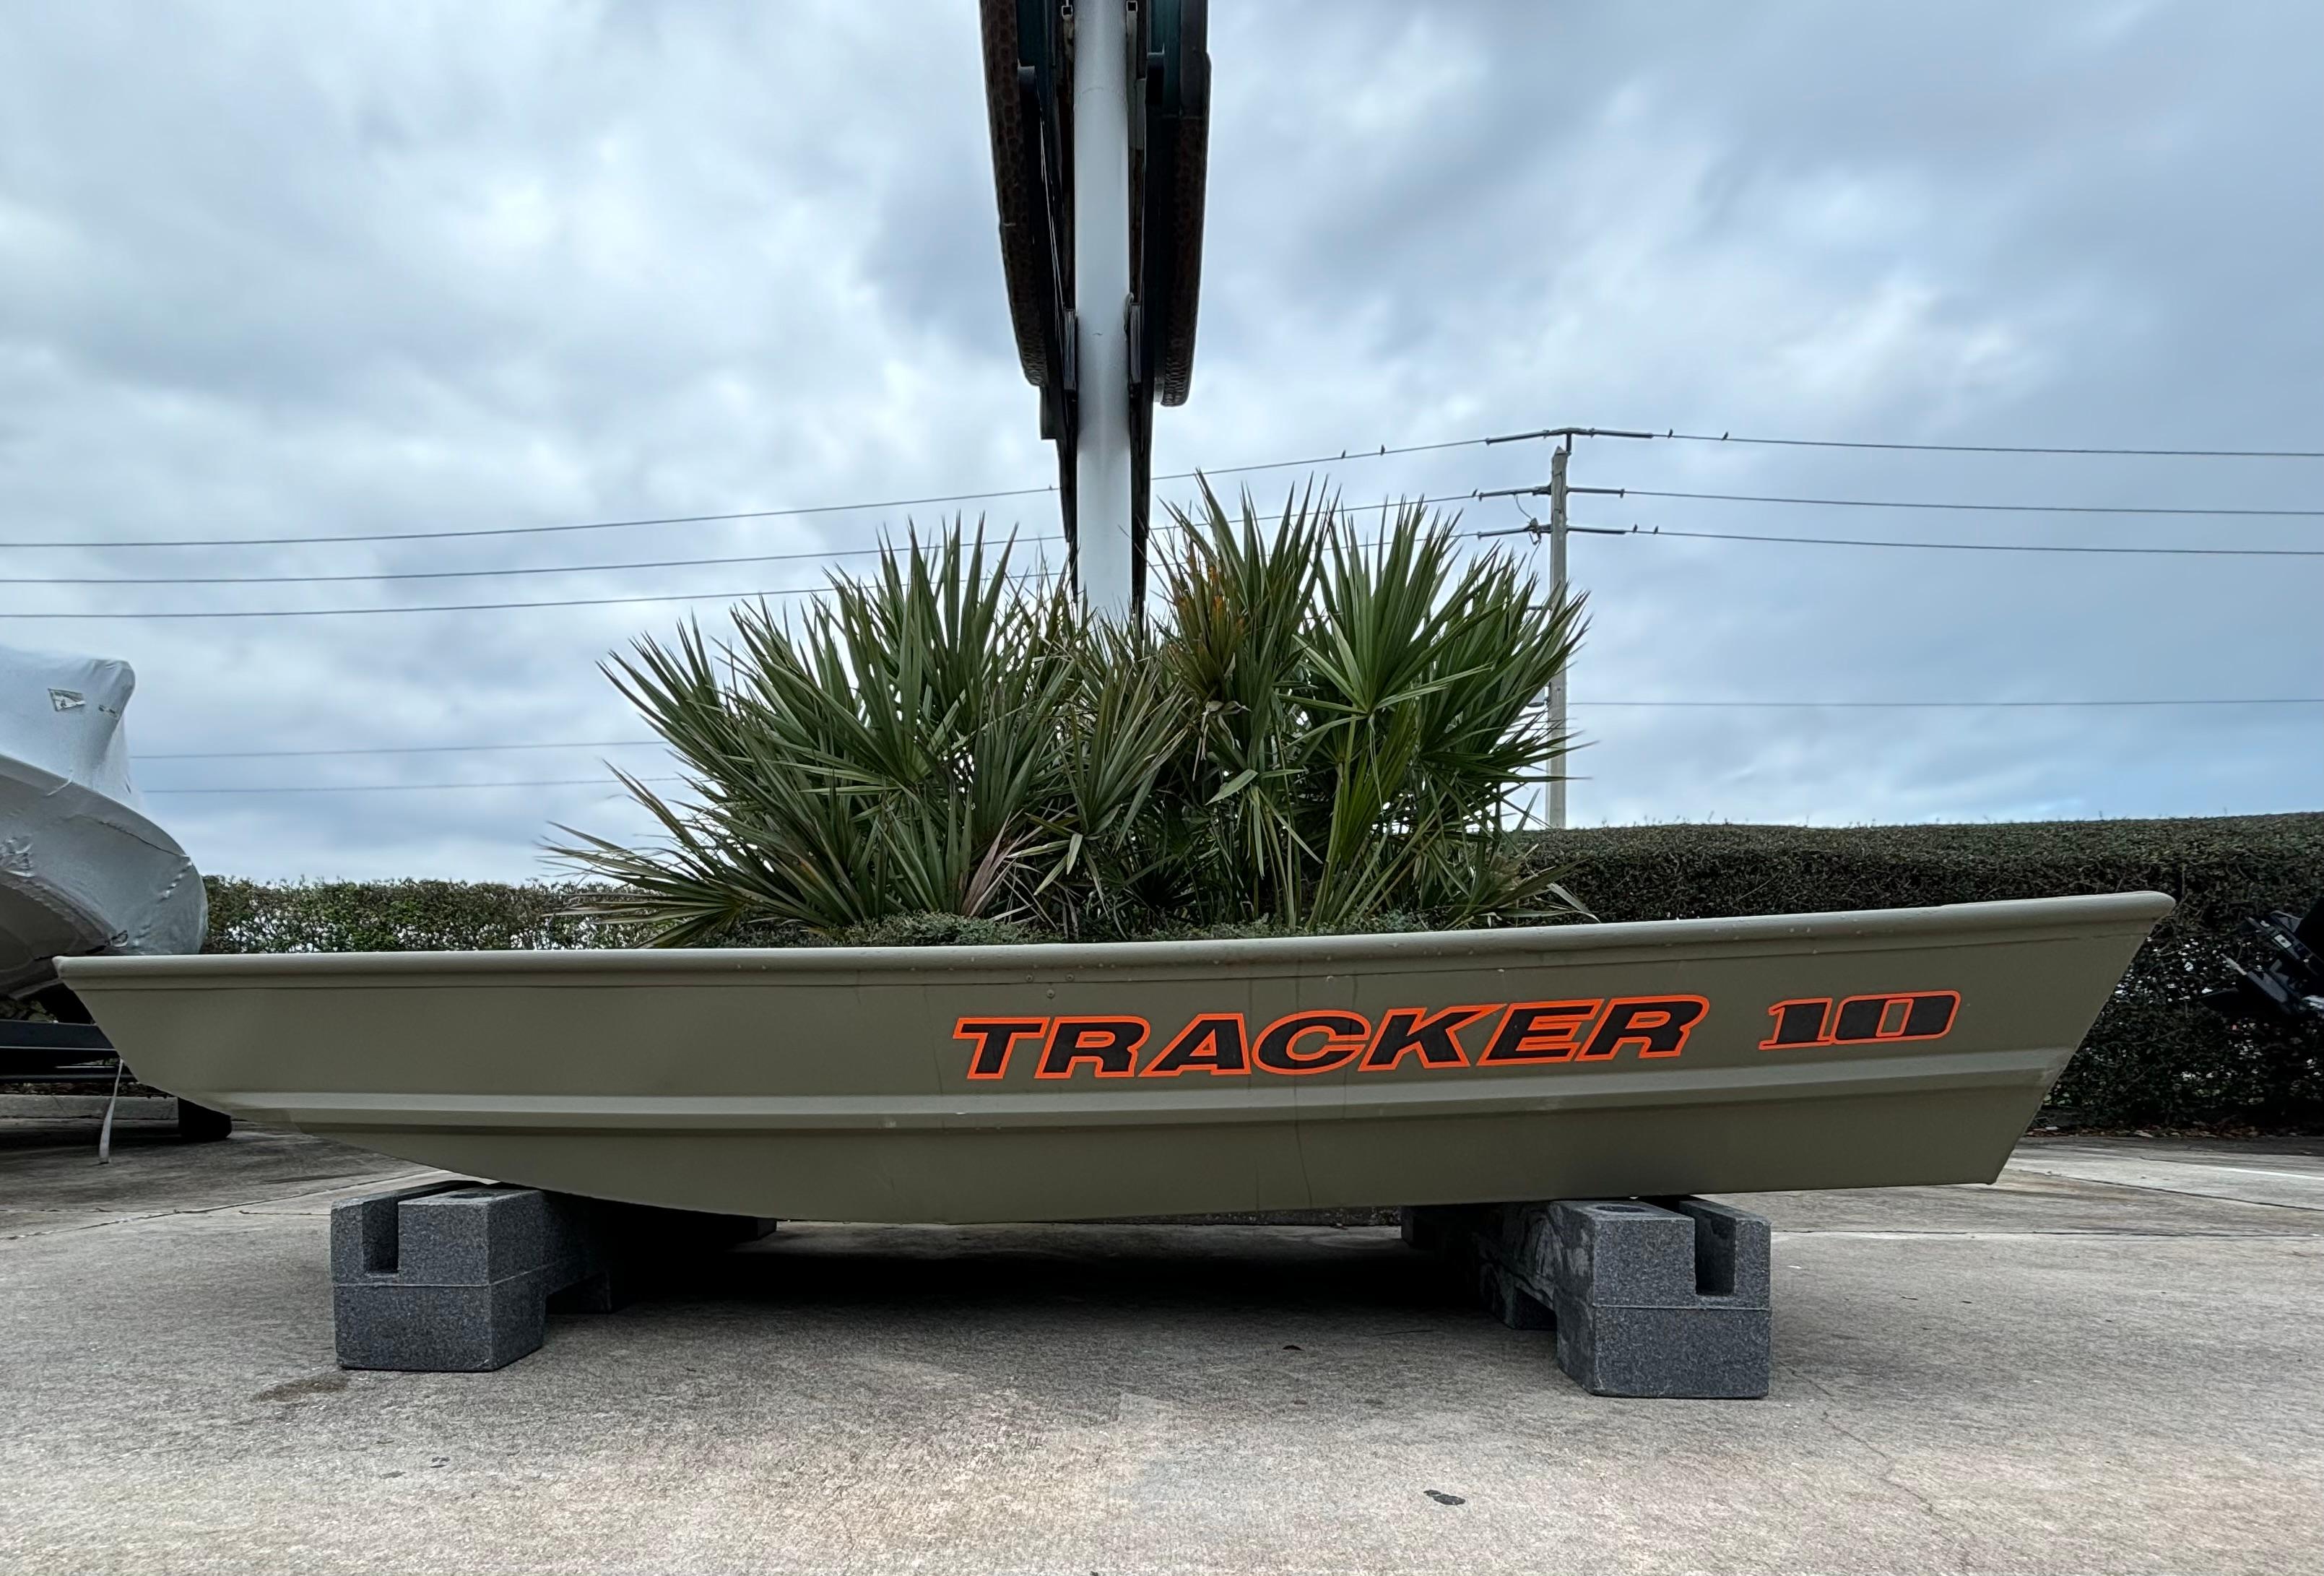 Explore Tracker Topper 1036 Riveted Jon Boats For Sale - Boat Trader